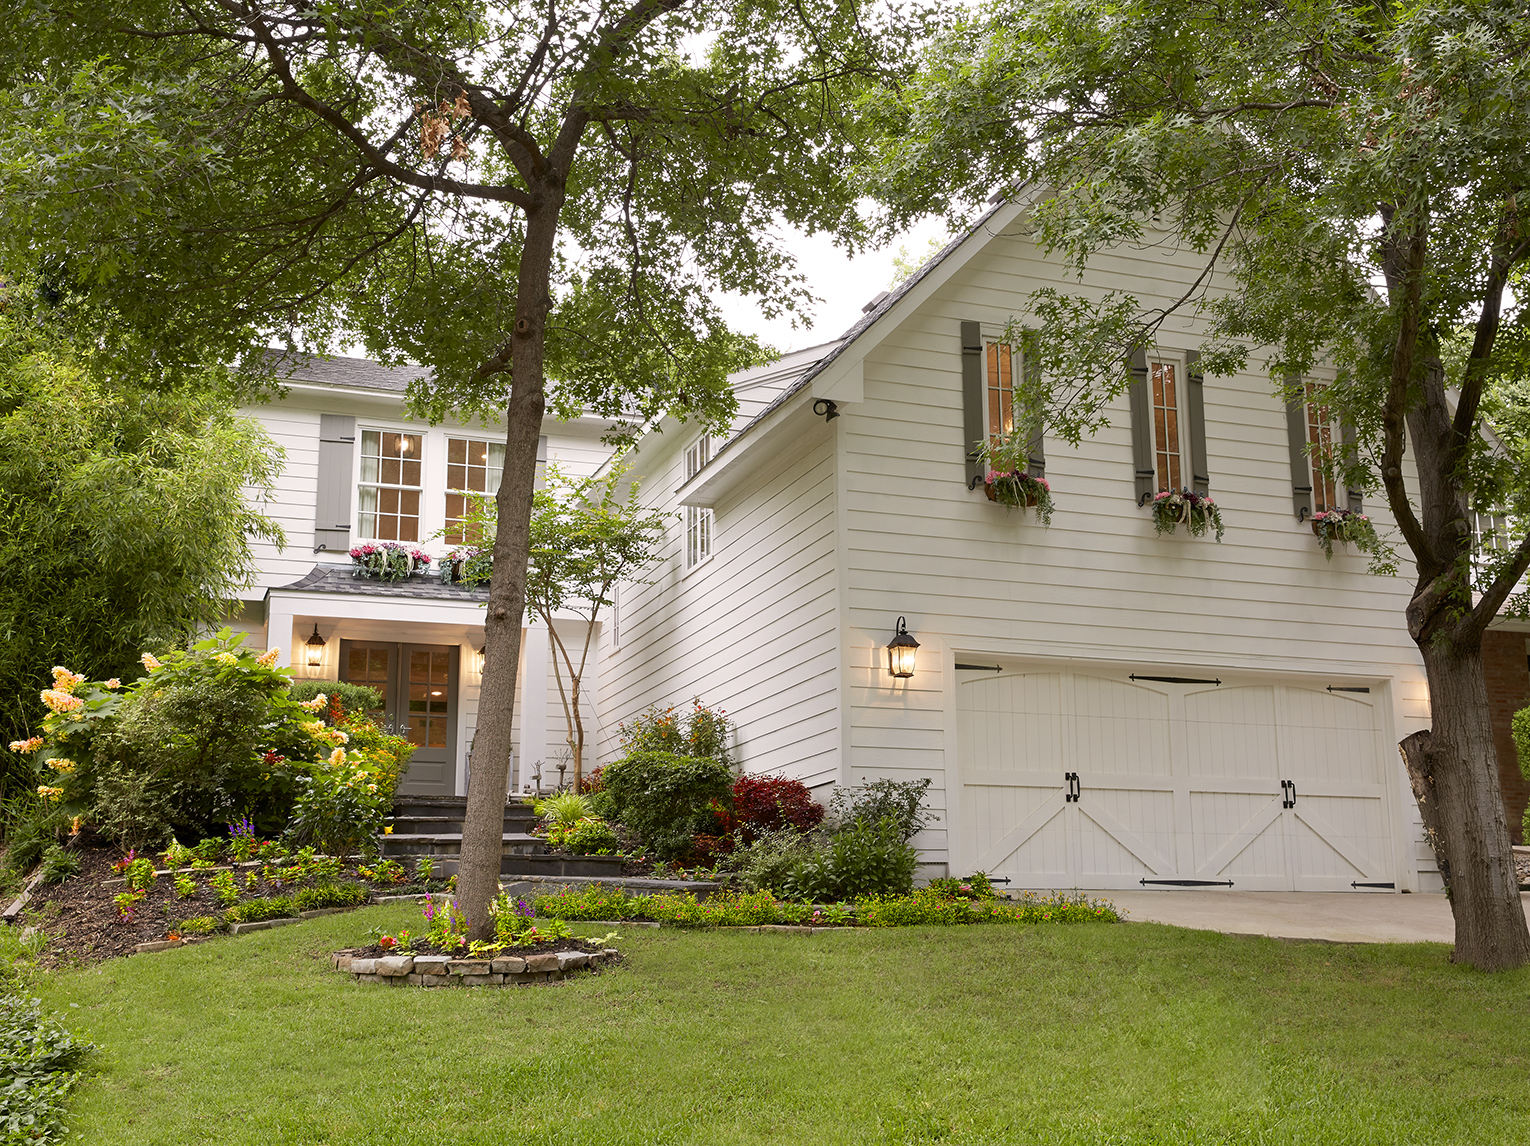 The farmhouse feel of the home’s exterior influenced Emily's decor choices for the interior. When her family purchased the home, she painted the front doors and added an overhang, shutters, flowerboxes and new landscaping.